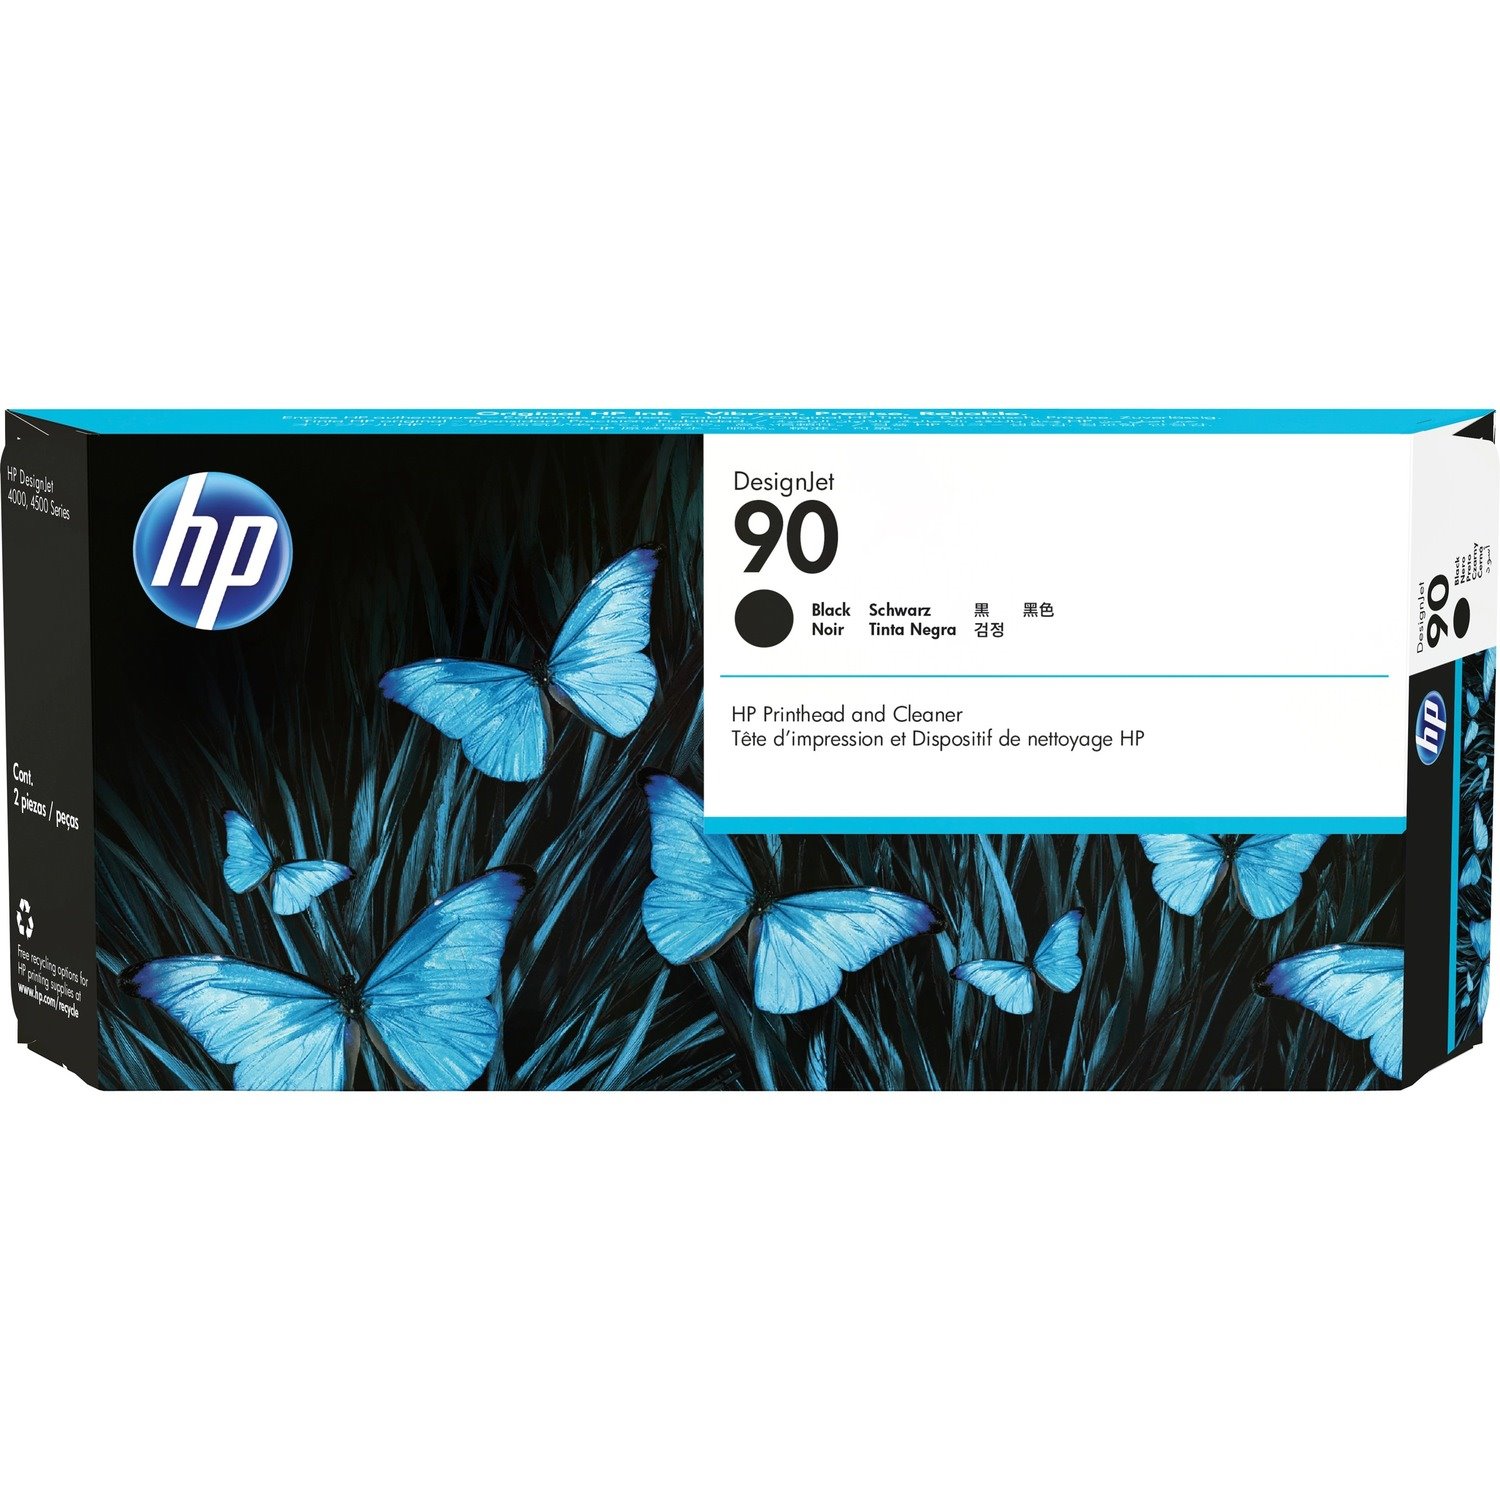 HP Cleaning Kit for Printer